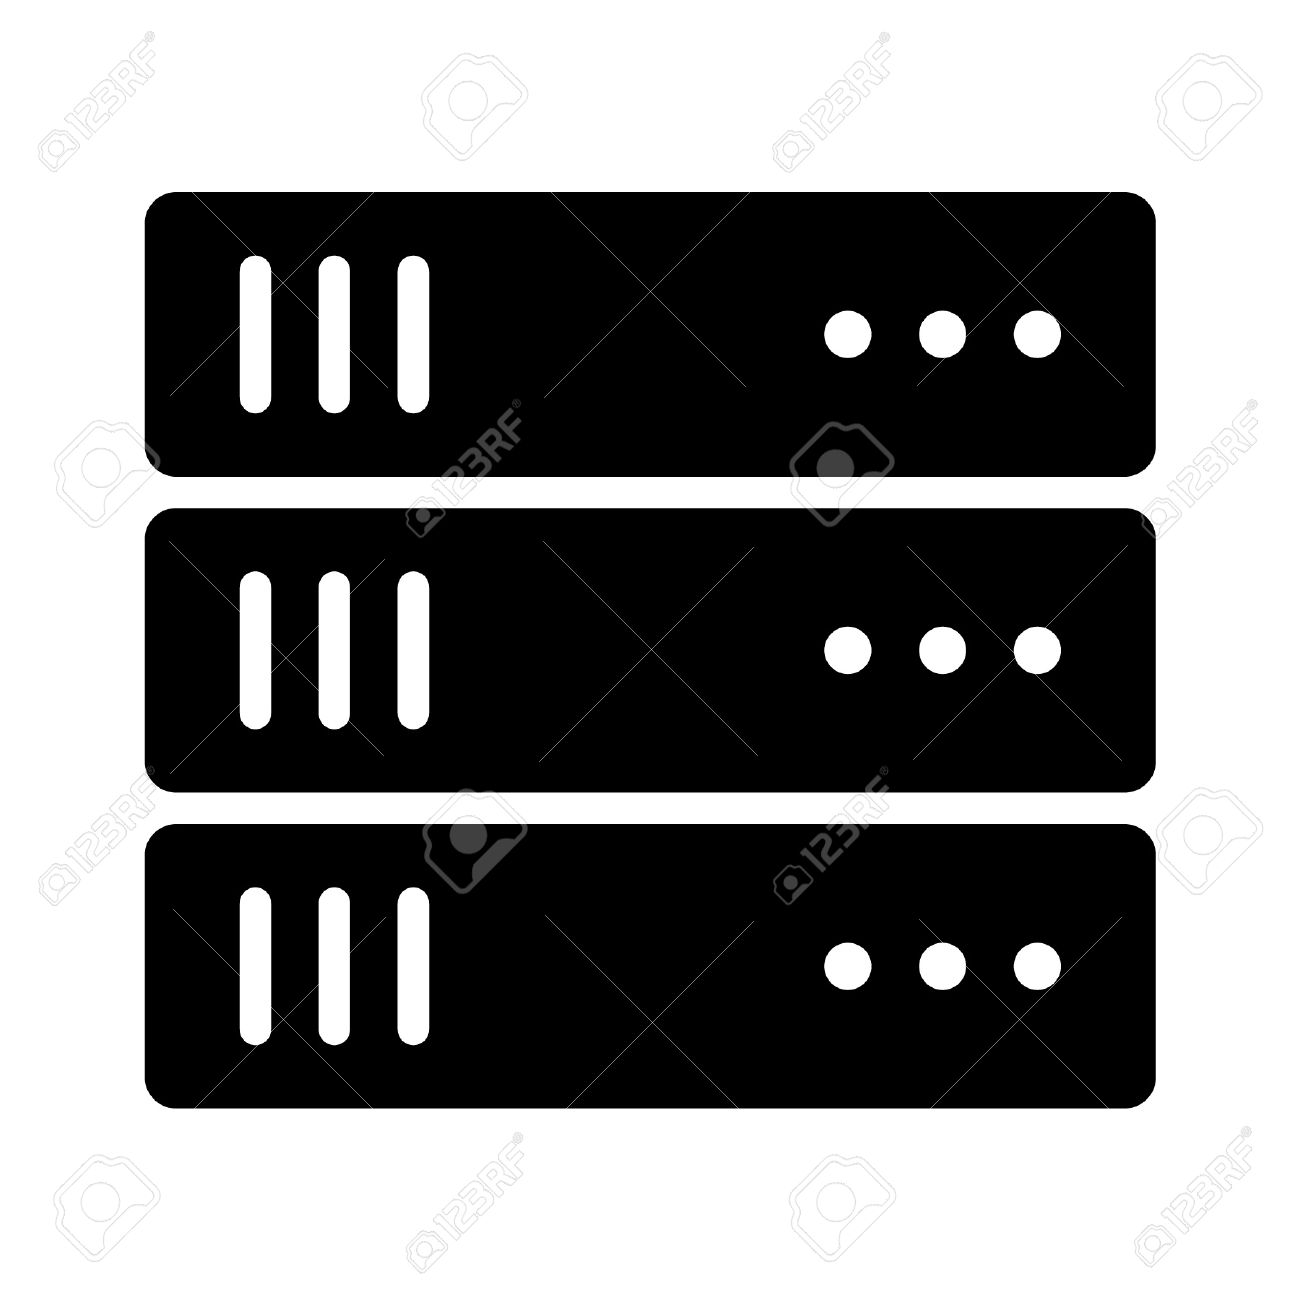 Electronic Device Icons, Flat Design Stock Vector - Illustration 